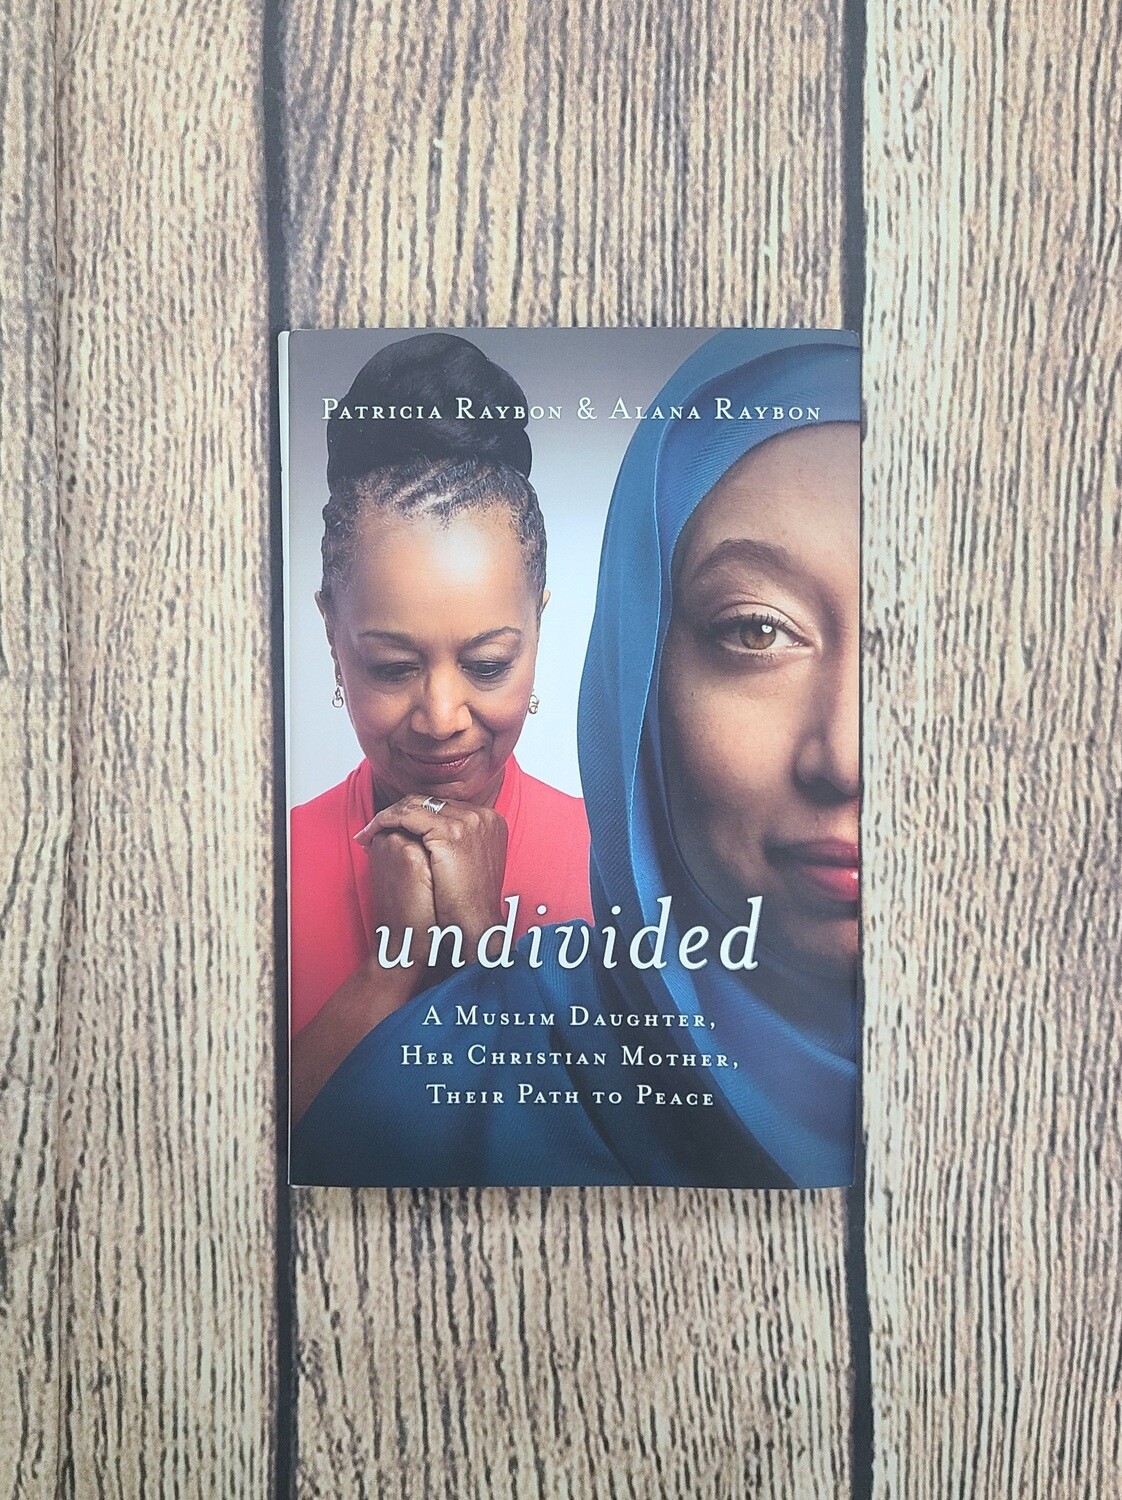 Undivided: A Muslim Daughter, Her Christian Mother, Their Path to Peace by Patricia Raybon and Alana Raybon